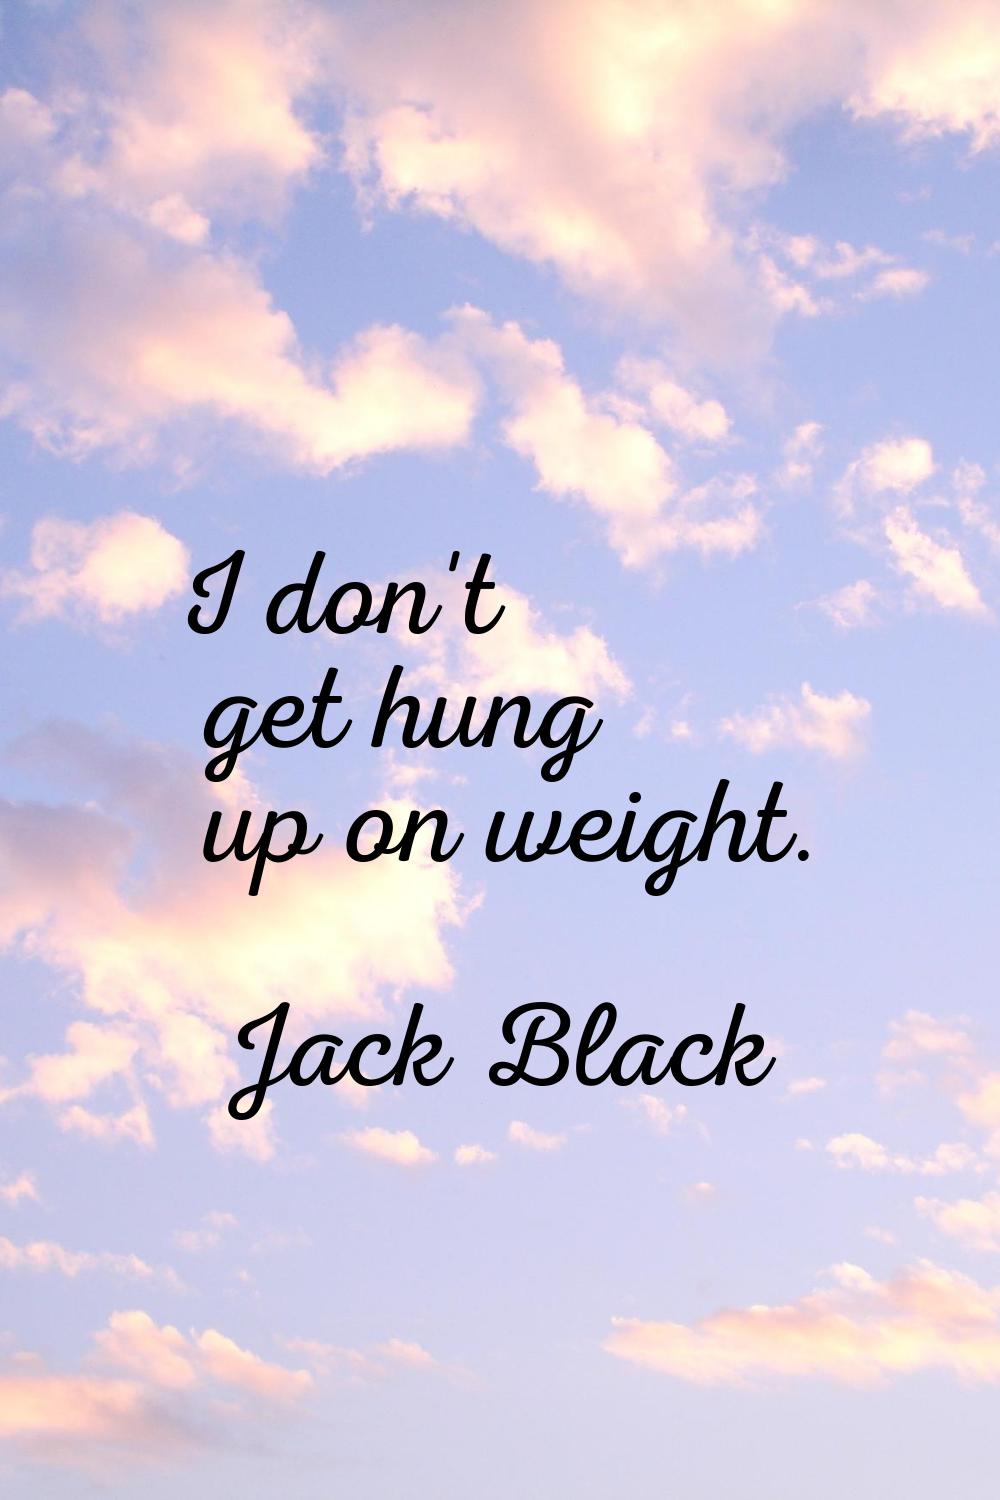 I don't get hung up on weight.